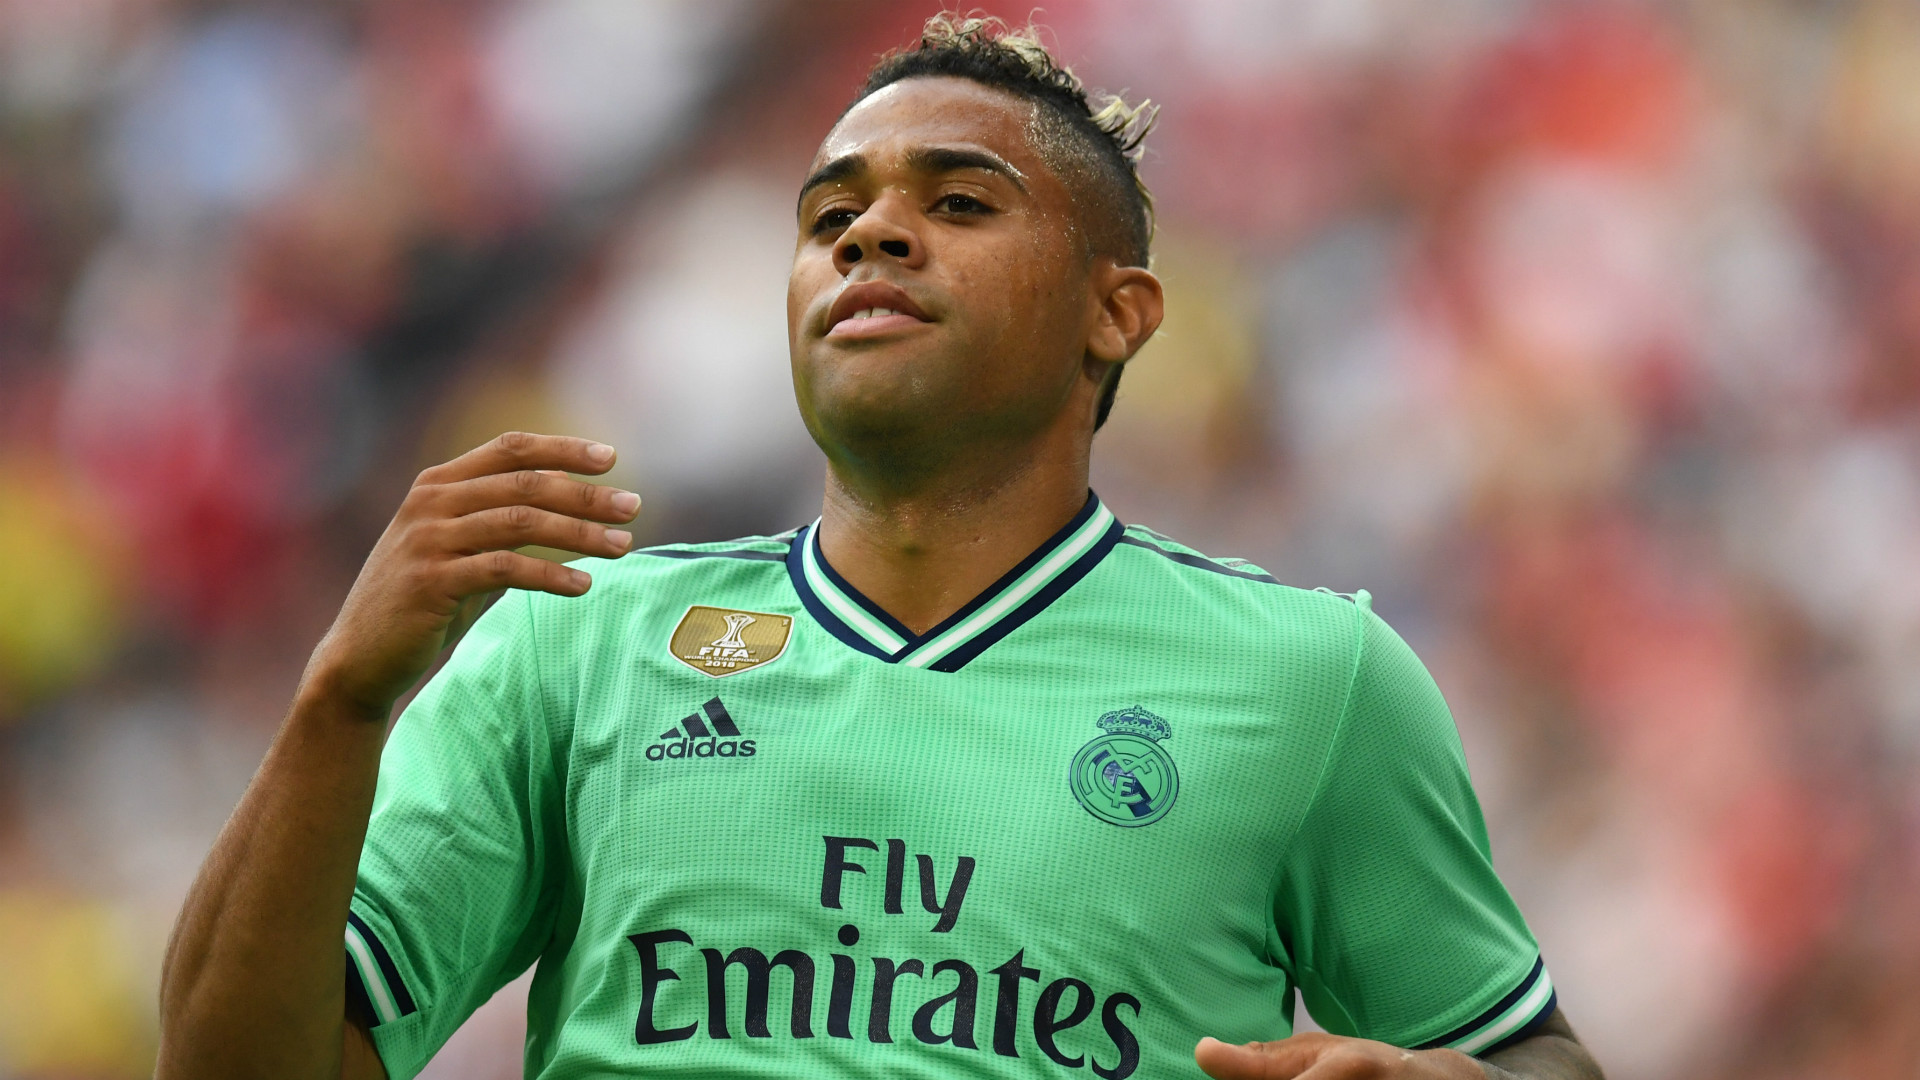 Transferts, le Real Madrid exigeant pour Mariano Diaz